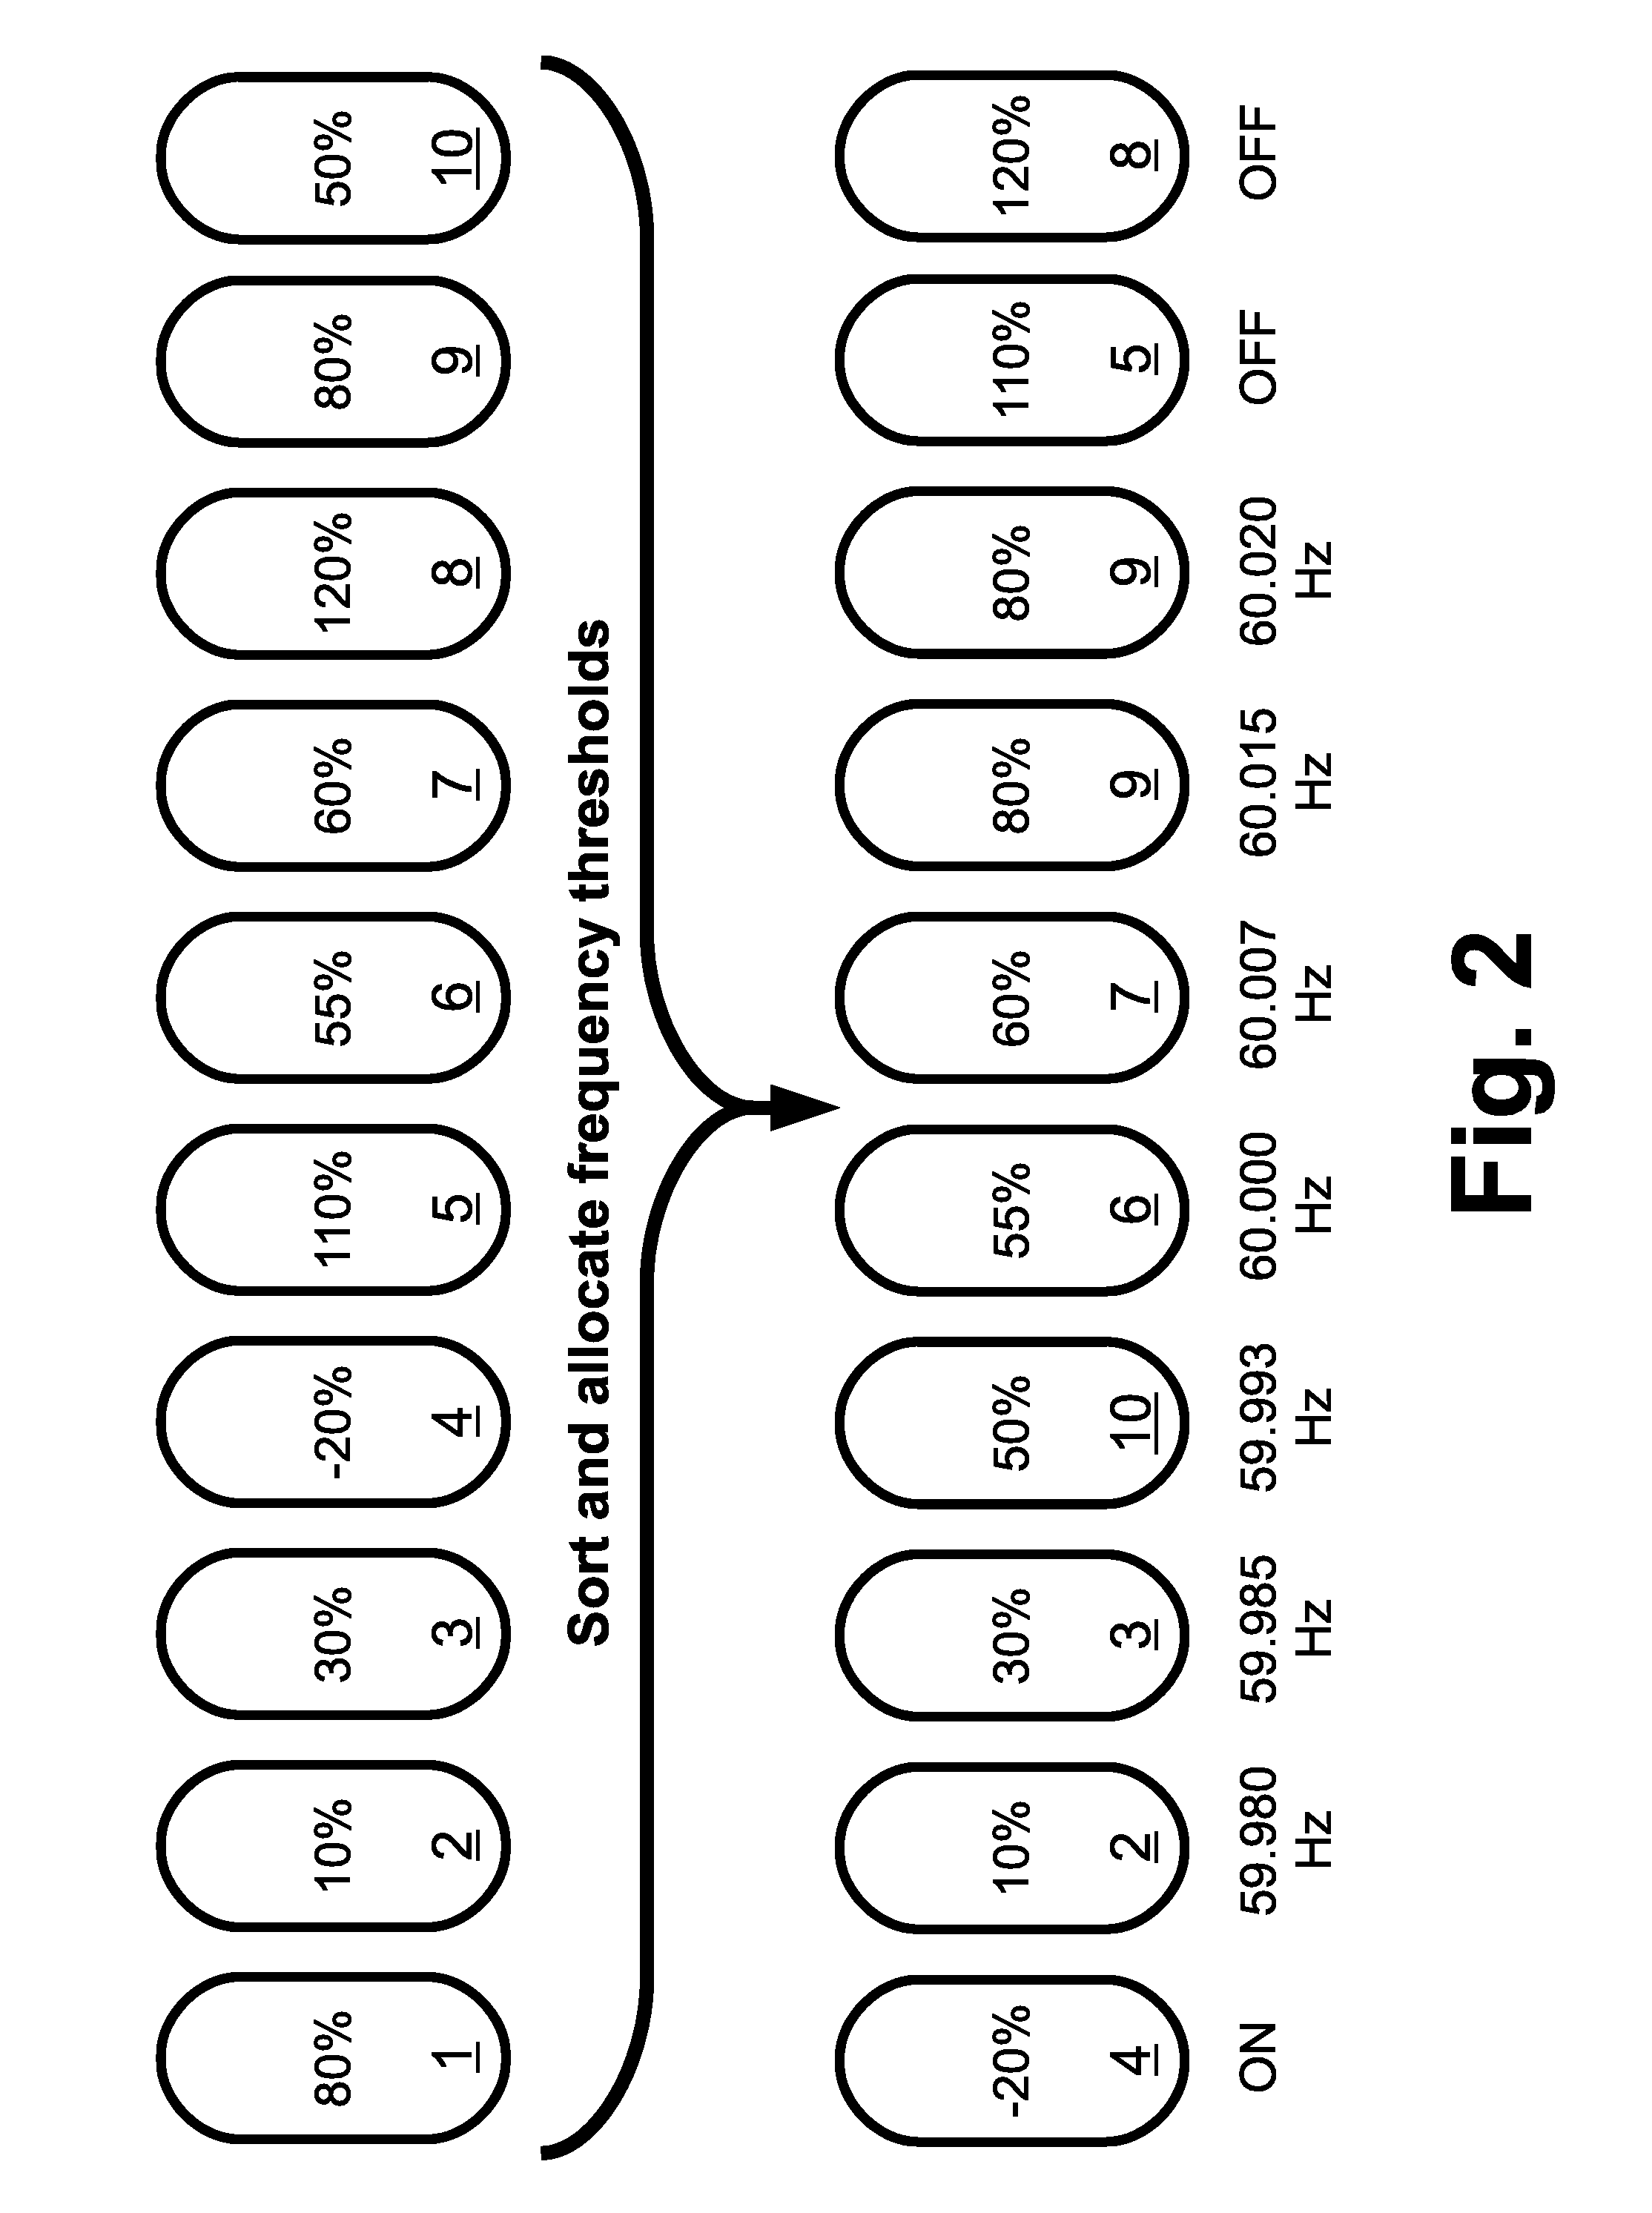 Primary frequency control through simulated droop control with electric loads